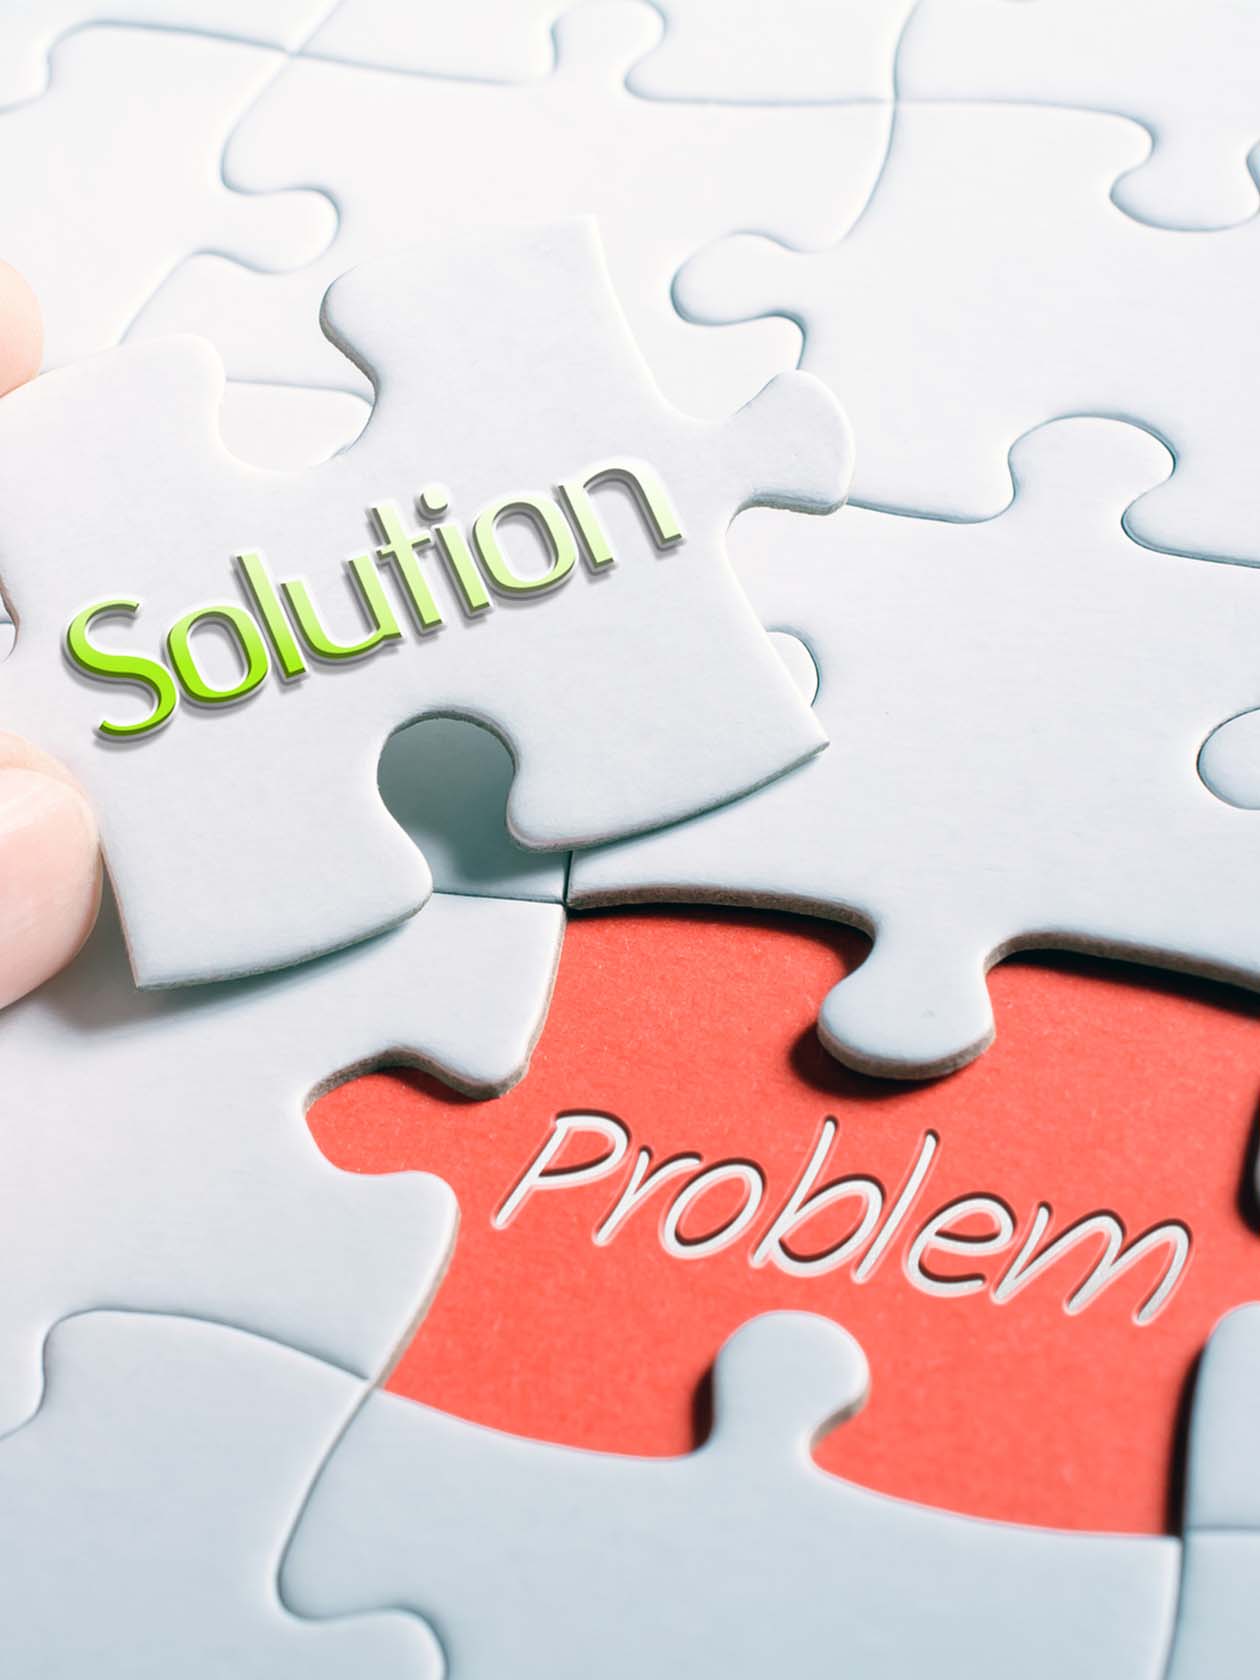 At CARCOLORS we believe helping customers problem solve is an important part in providing excellent customer service.